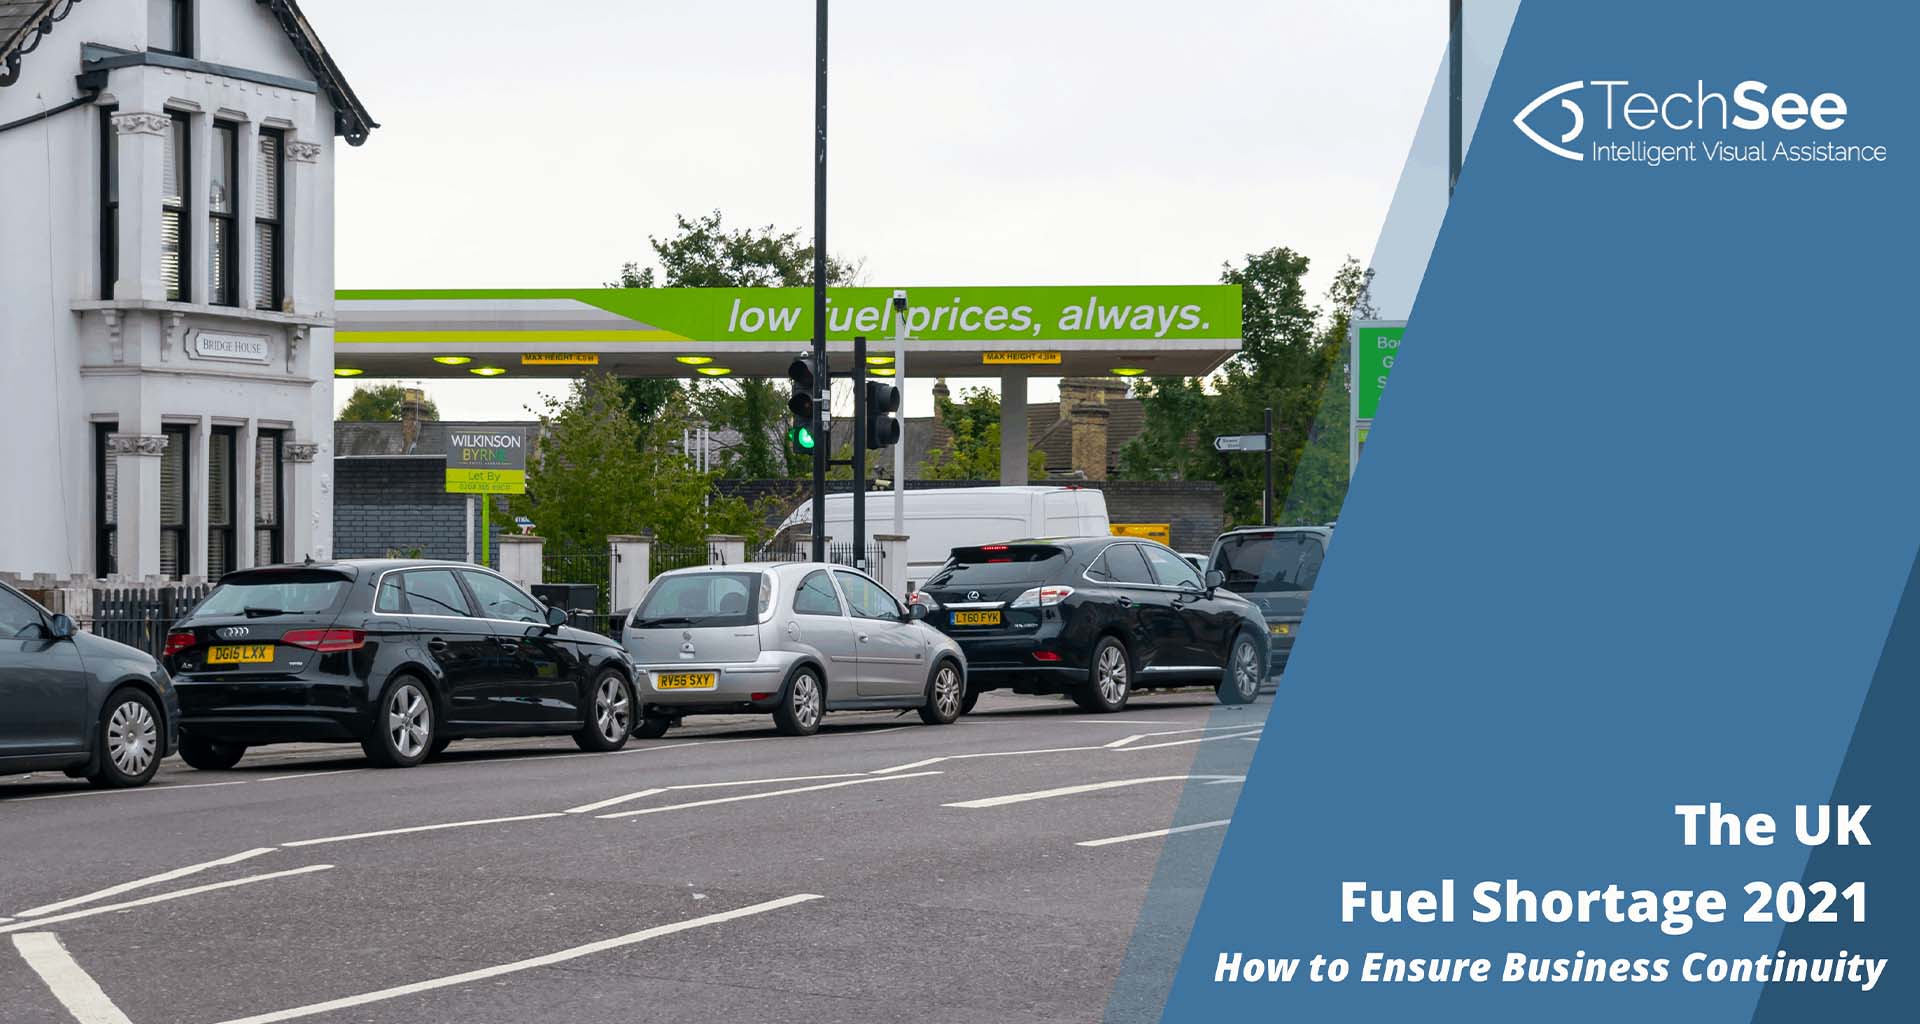 The UK Fuel Shortage 2021: How to Ensure Business Continuity